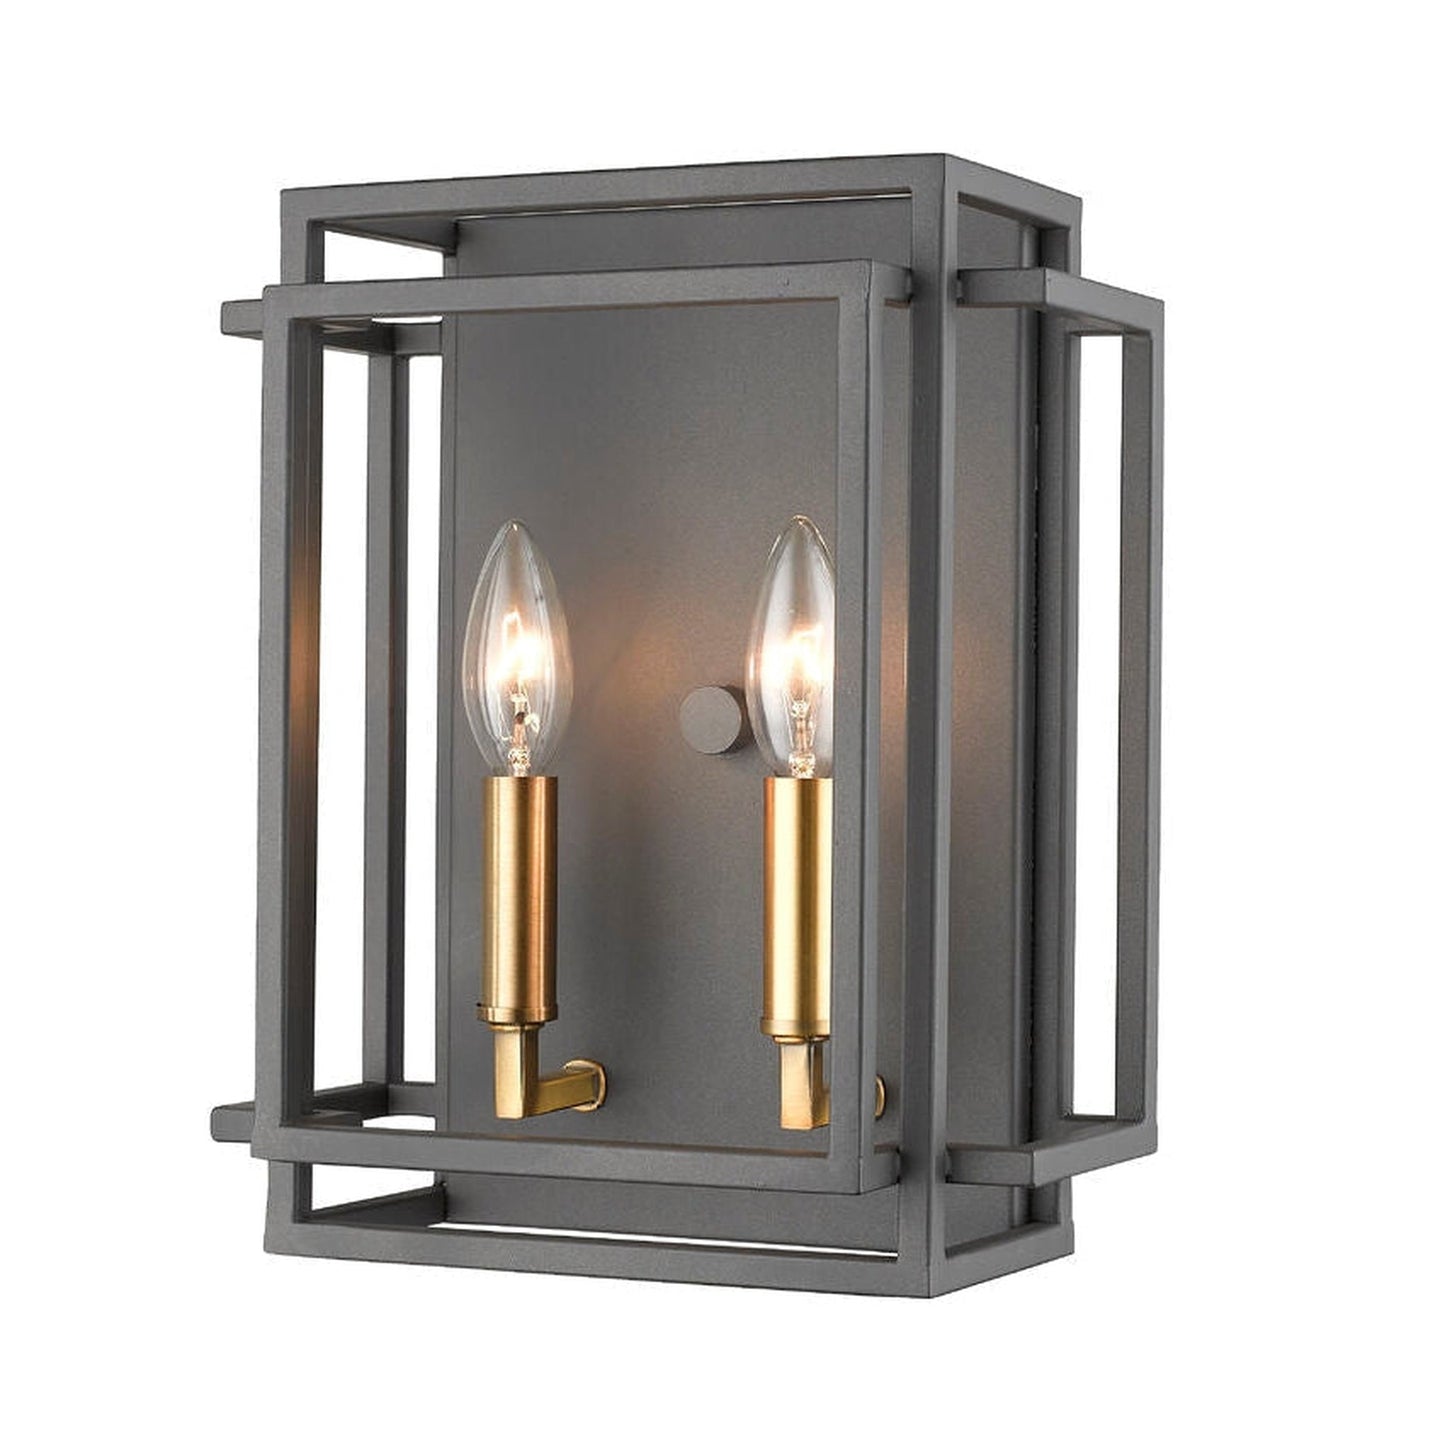 Z-Lite Titania 10" 2-Light Bronze and Olde Brass Wall Sconce